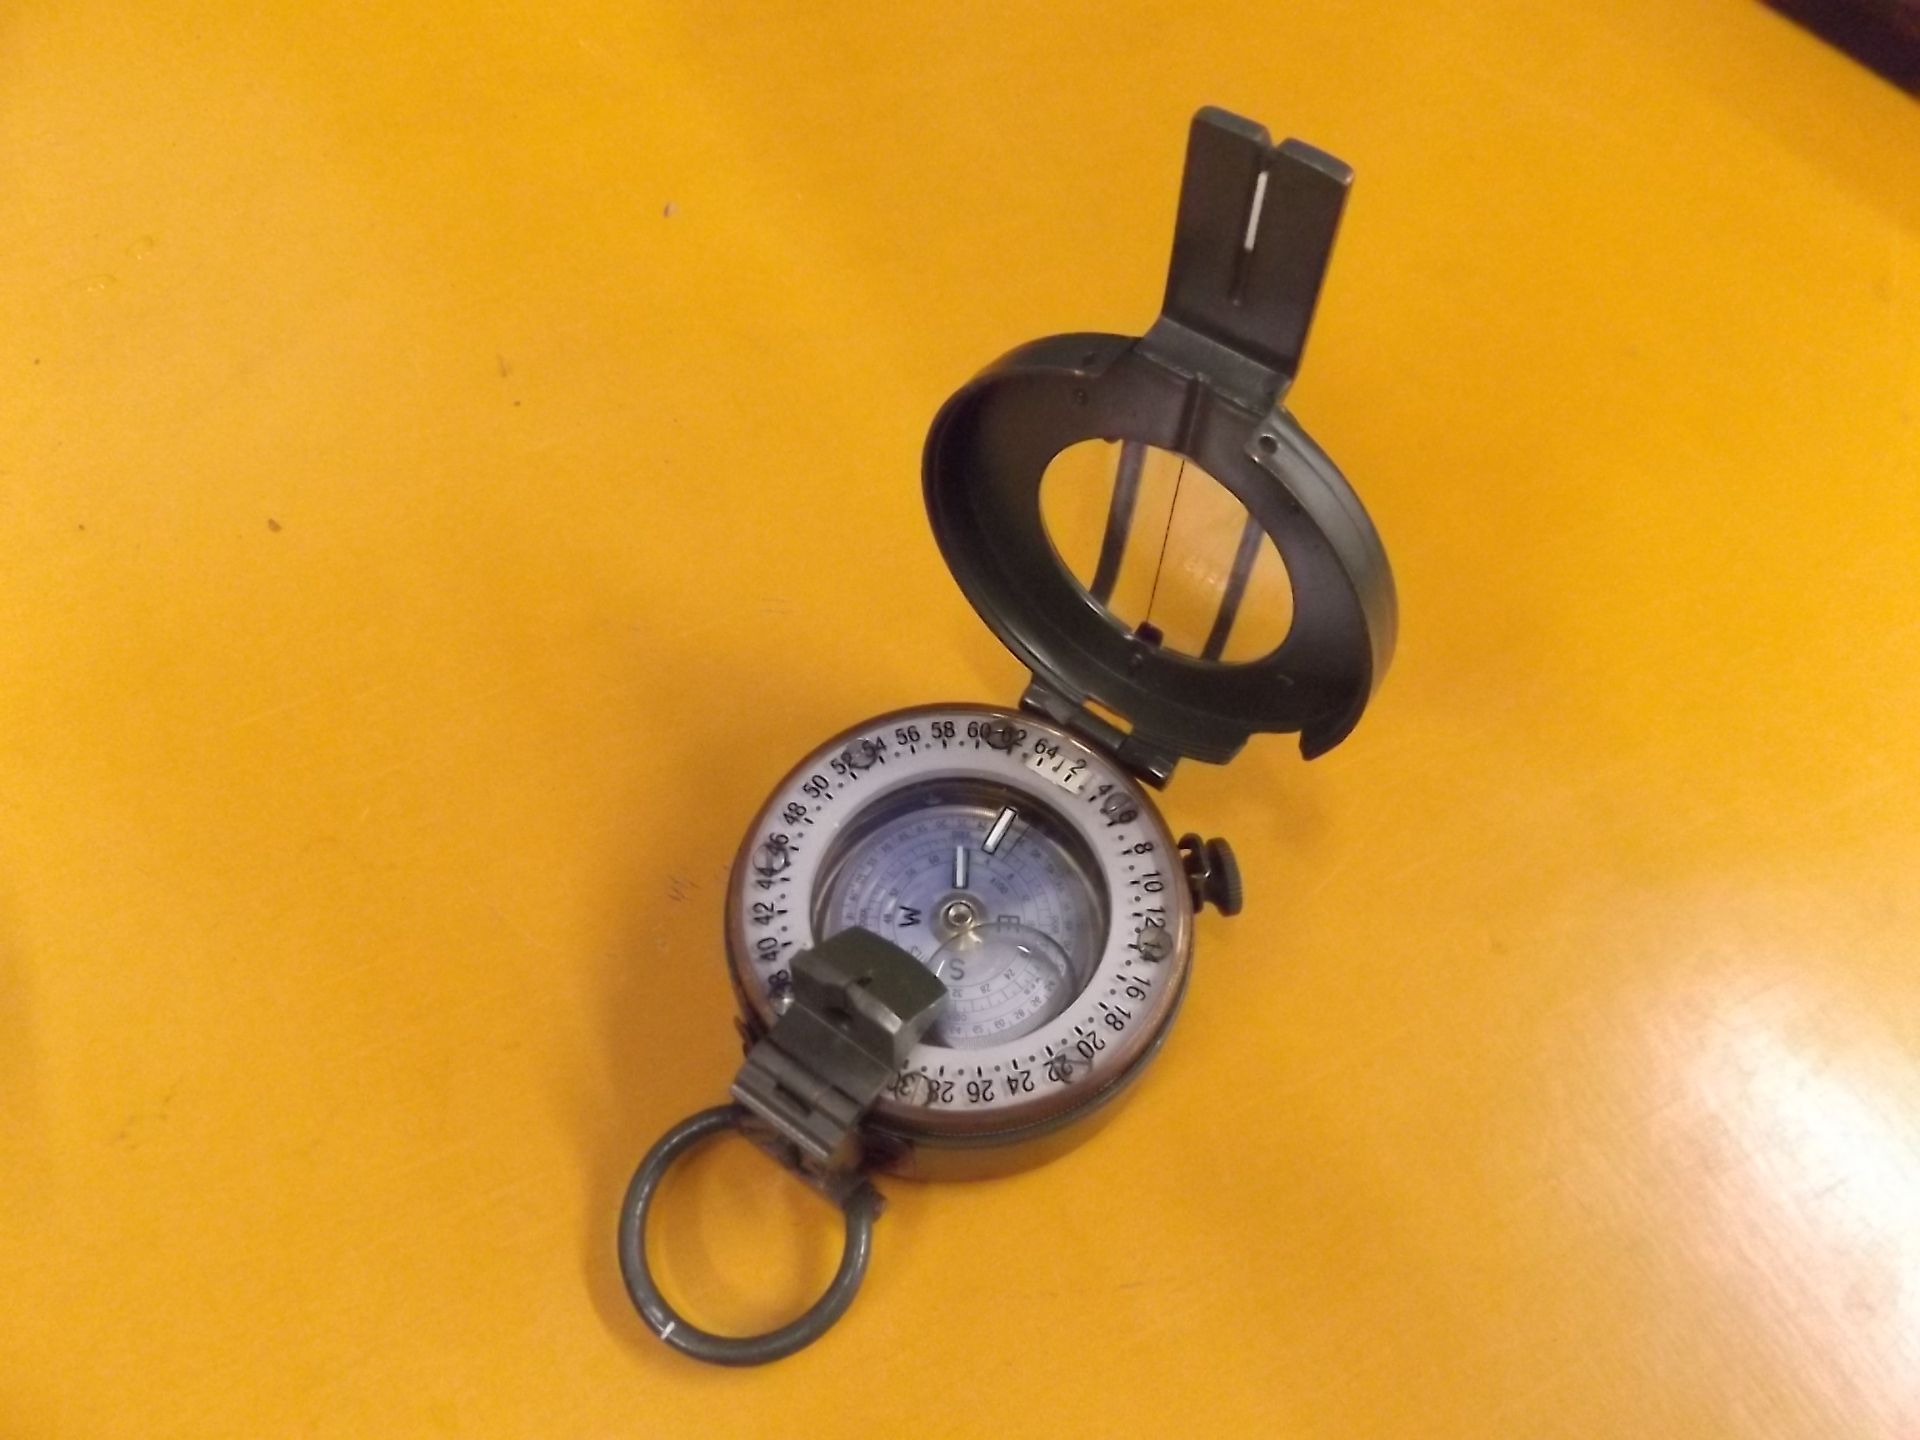 Genuine British Army Stanley Prismatic Marching Compass complete with webbing pouch - Image 2 of 7